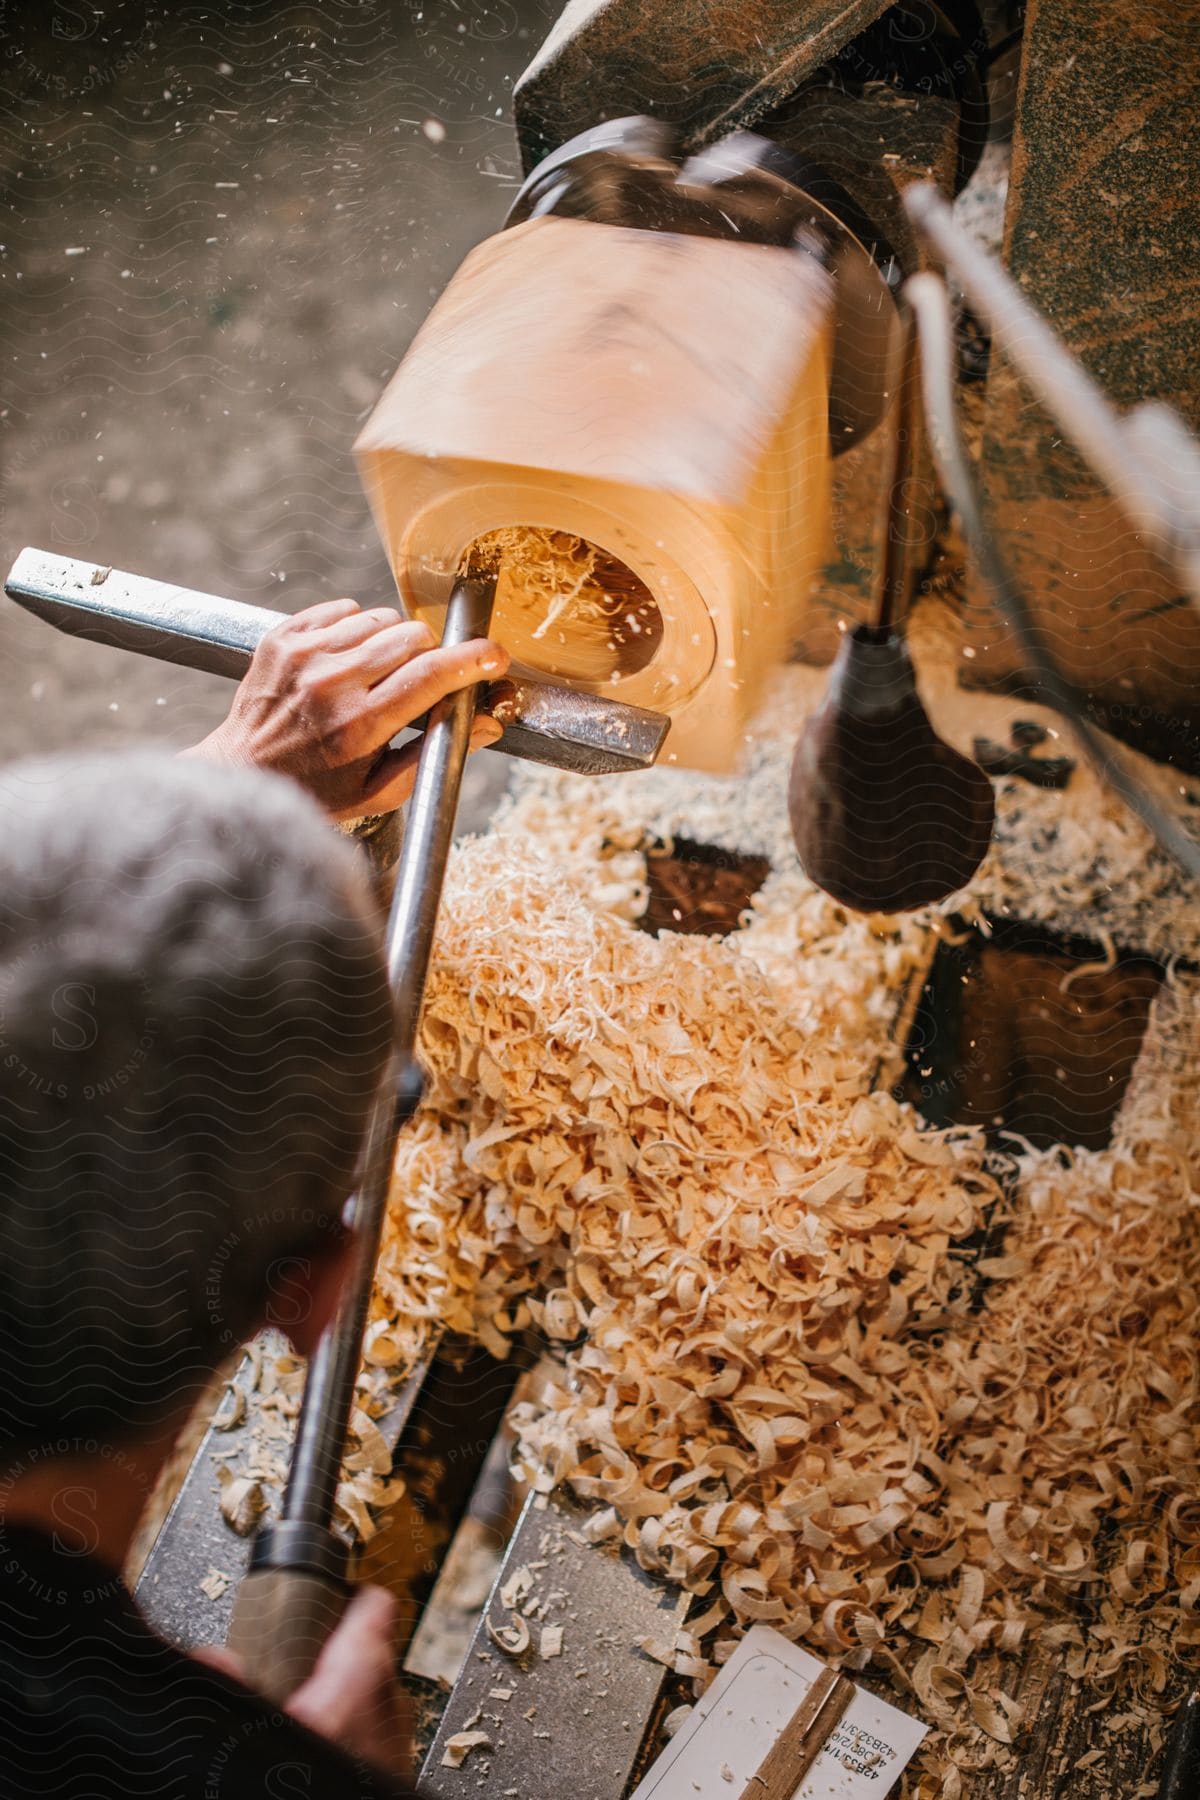 A woodworker hollows out the middle of a wood block on his lathe